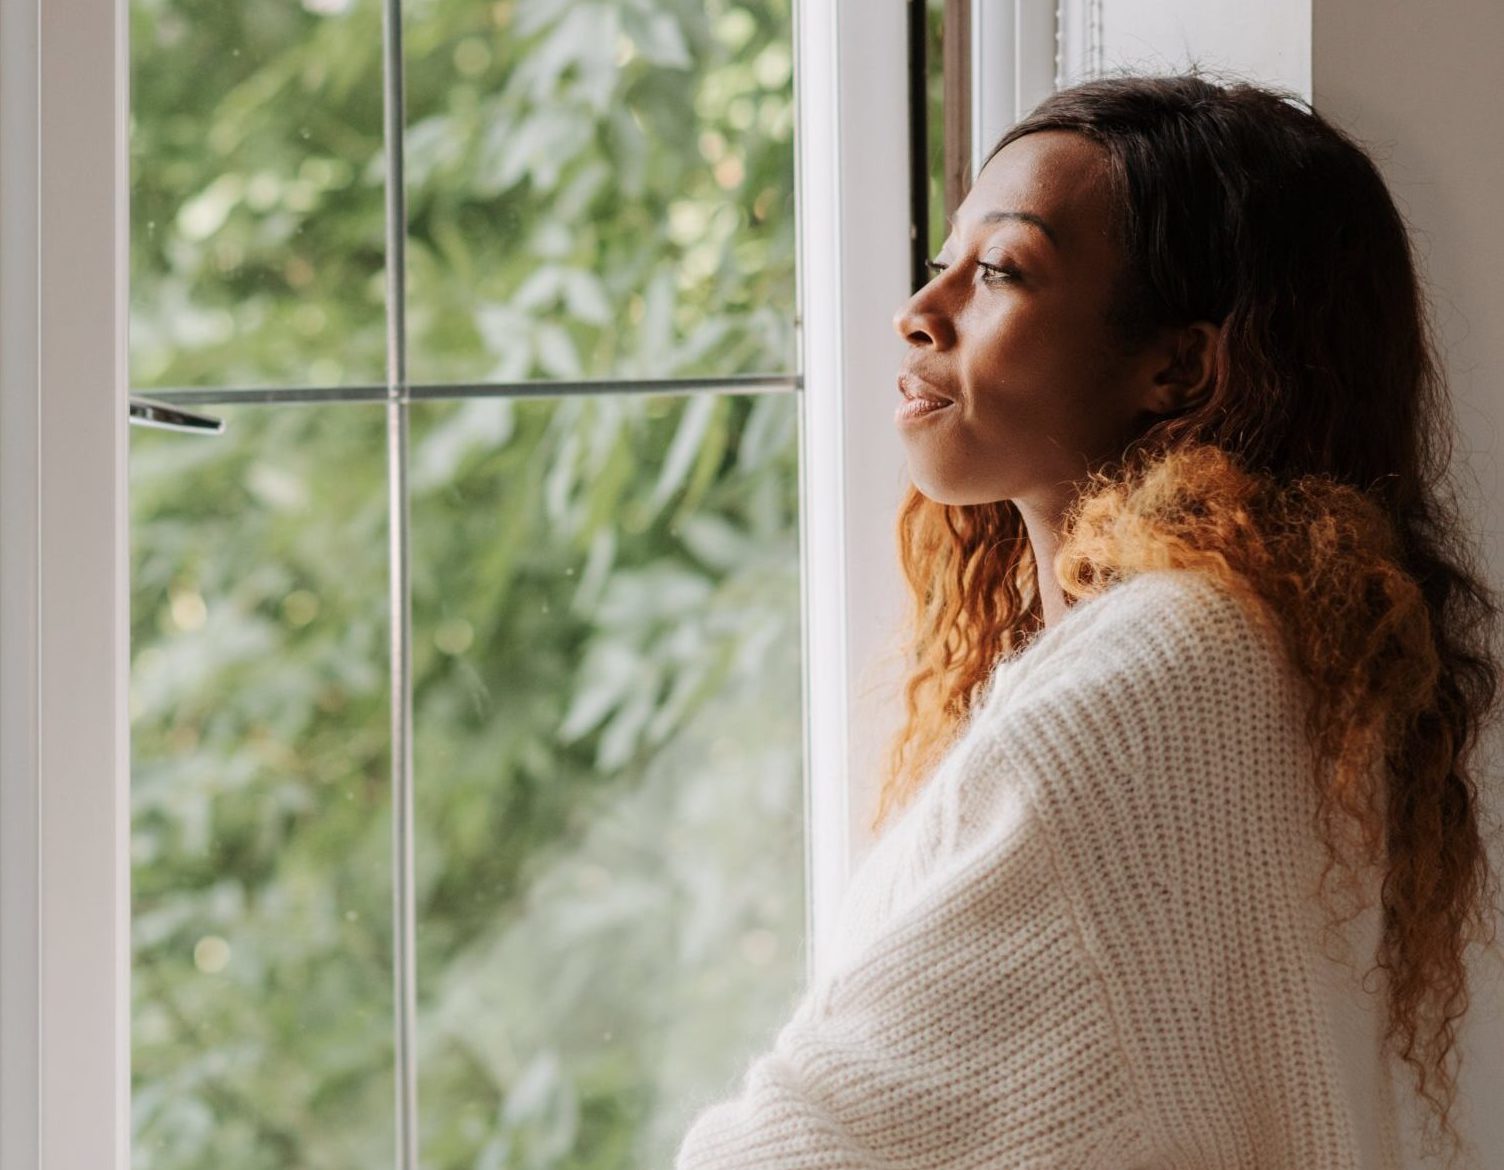 Woman wearing a white sweater and looking out an open window.